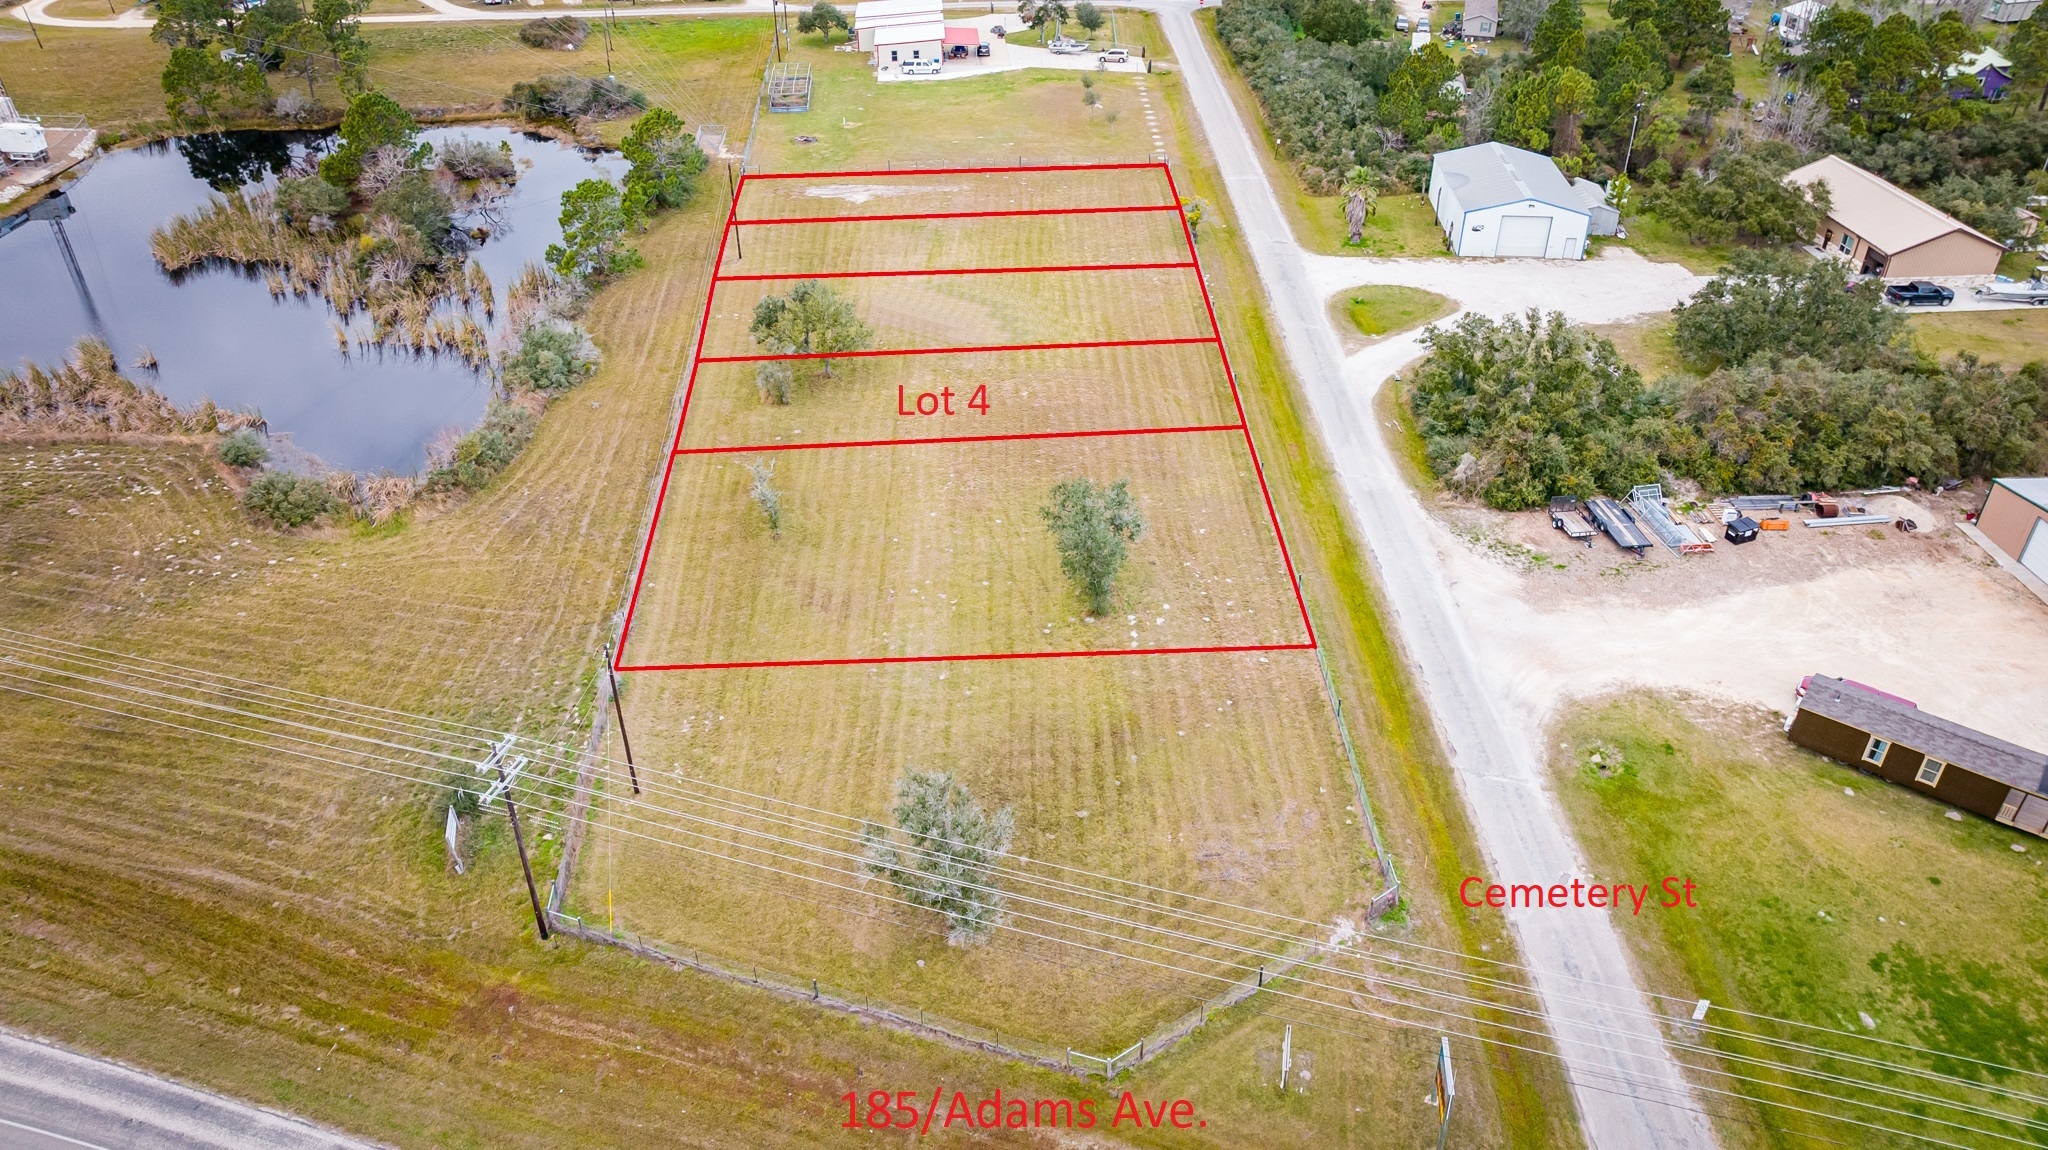 Cemetery Road Port O'Conner-4 Lot 4